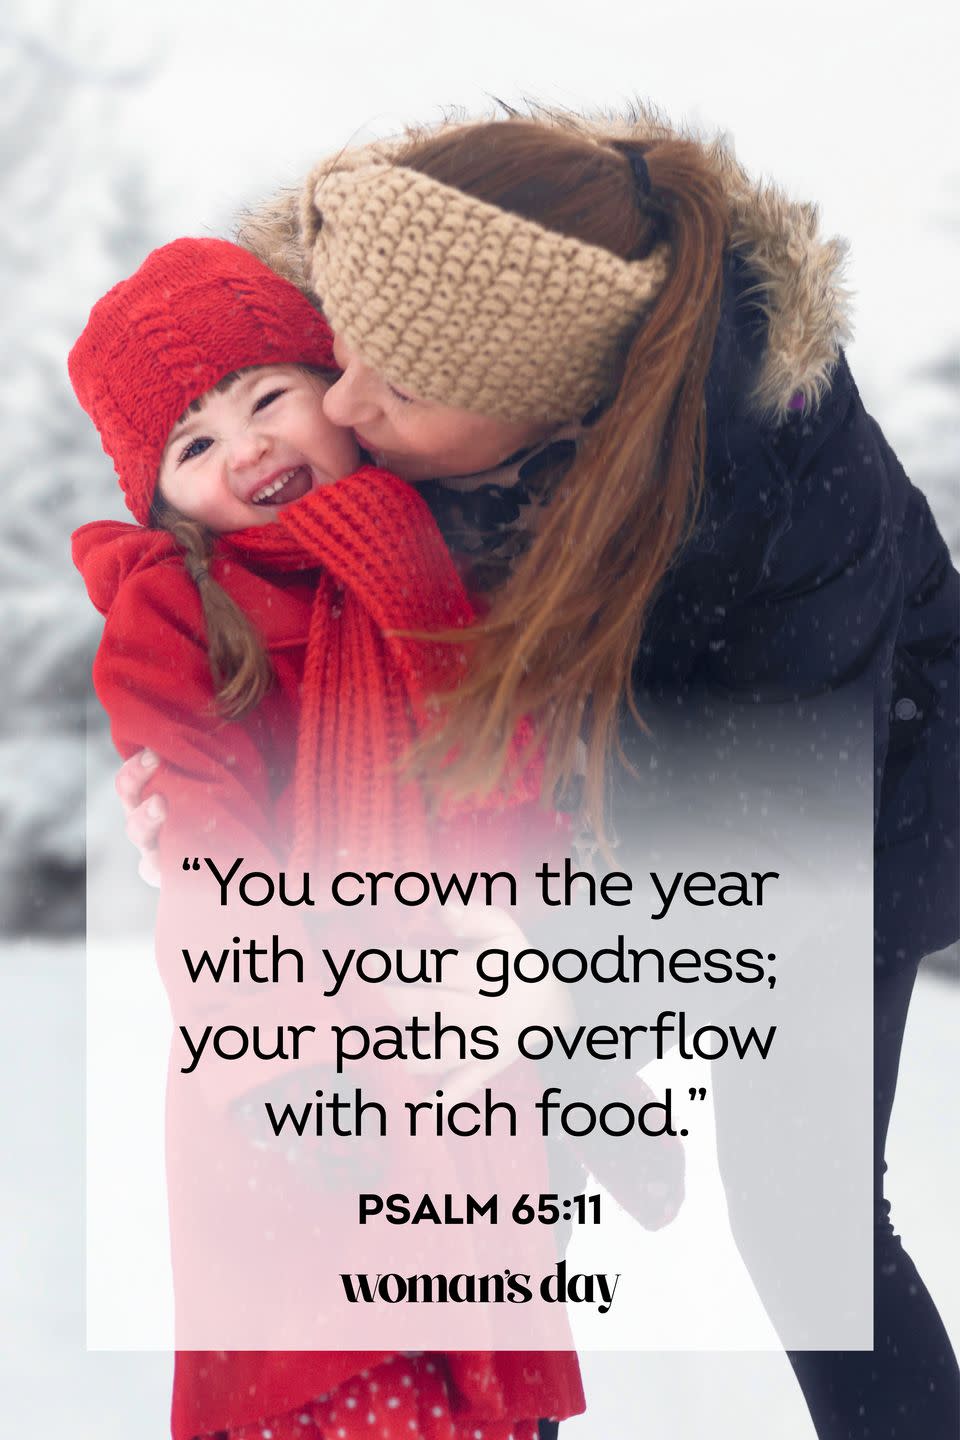 <p>“You crown the year with your goodness; your paths overflow with rich food.”</p><p><strong>The Good News:</strong> In God, there is an abundance of goodness year-round.</p>